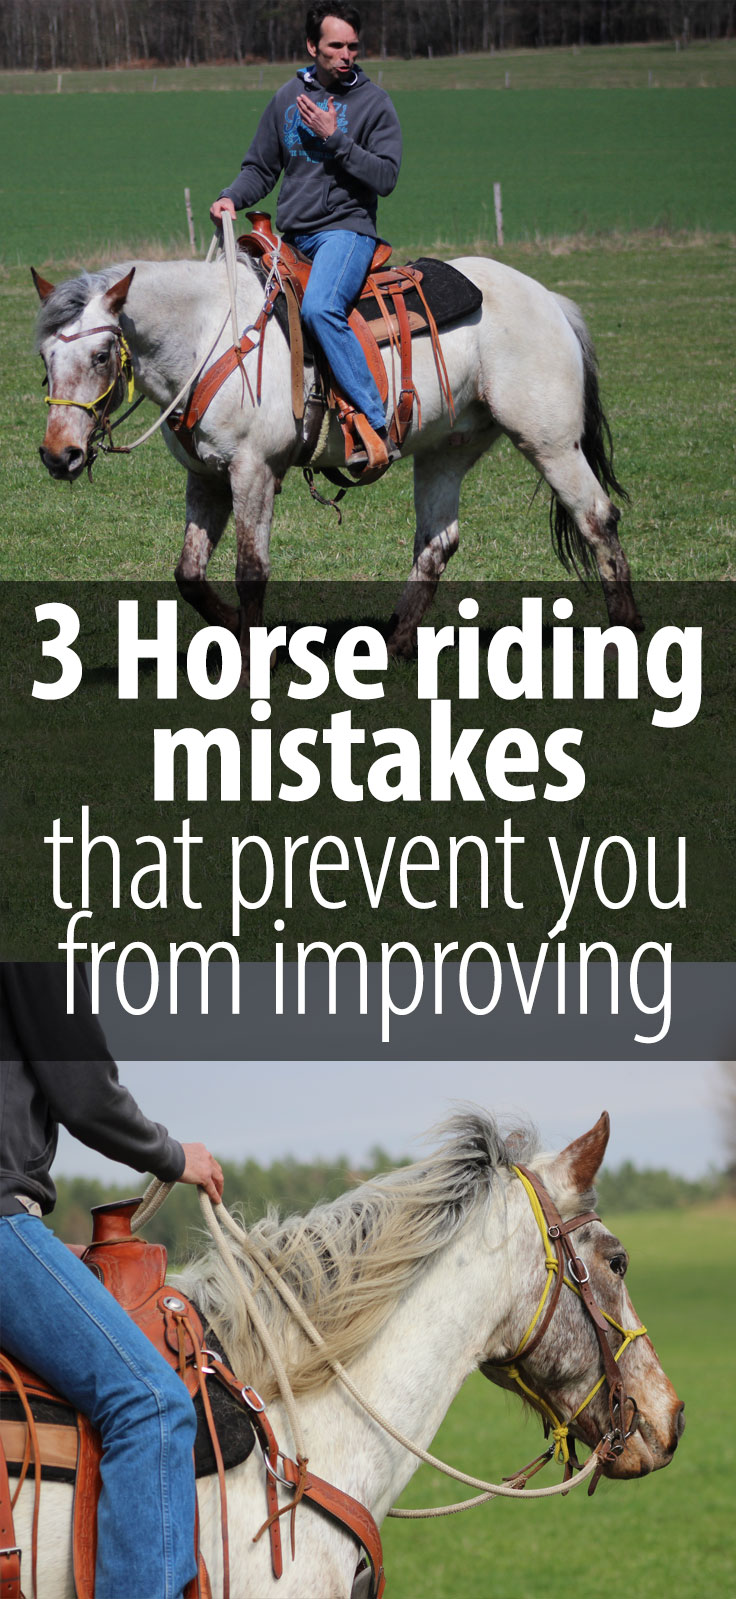 Some horse training tips everyone should keep in mind. I am sure I did every single one of them at one point or another